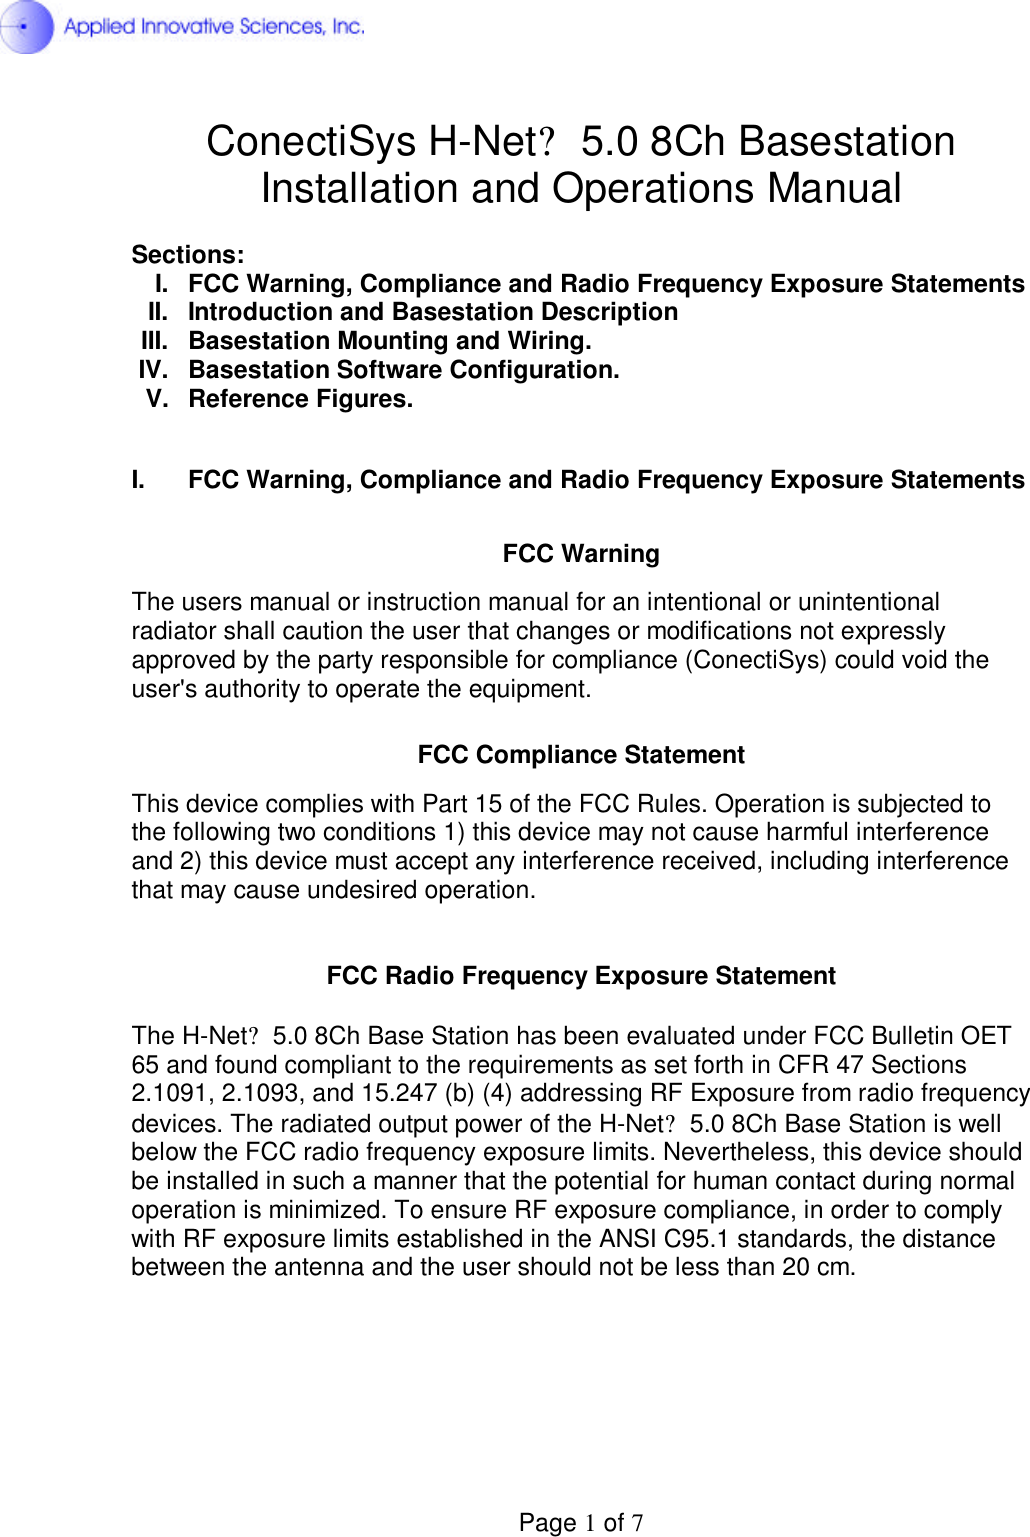  Page 1 of 7 ConectiSys H-Net? 5.0 8Ch Basestation Installation and Operations Manual  Sections: I.  FCC Warning, Compliance and Radio Frequency Exposure Statements II. Introduction and Basestation Description III. Basestation Mounting and Wiring. IV.  Basestation Software Configuration. V.  Reference Figures.  I.  FCC Warning, Compliance and Radio Frequency Exposure Statements   FCC Warning  The users manual or instruction manual for an intentional or unintentional radiator shall caution the user that changes or modifications not expressly approved by the party responsible for compliance (ConectiSys) could void the user&apos;s authority to operate the equipment.   FCC Compliance Statement  This device complies with Part 15 of the FCC Rules. Operation is subjected to the following two conditions 1) this device may not cause harmful interference and 2) this device must accept any interference received, including interference that may cause undesired operation.   FCC Radio Frequency Exposure Statement  The H-Net? 5.0 8Ch Base Station has been evaluated under FCC Bulletin OET  65 and found compliant to the requirements as set forth in CFR 47 Sections  2.1091, 2.1093, and 15.247 (b) (4) addressing RF Exposure from radio frequency devices. The radiated output power of the H-Net? 5.0 8Ch Base Station is well below the FCC radio frequency exposure limits. Nevertheless, this device should be installed in such a manner that the potential for human contact during normal operation is minimized. To ensure RF exposure compliance, in order to comply with RF exposure limits established in the ANSI C95.1 standards, the distance between the antenna and the user should not be less than 20 cm.       